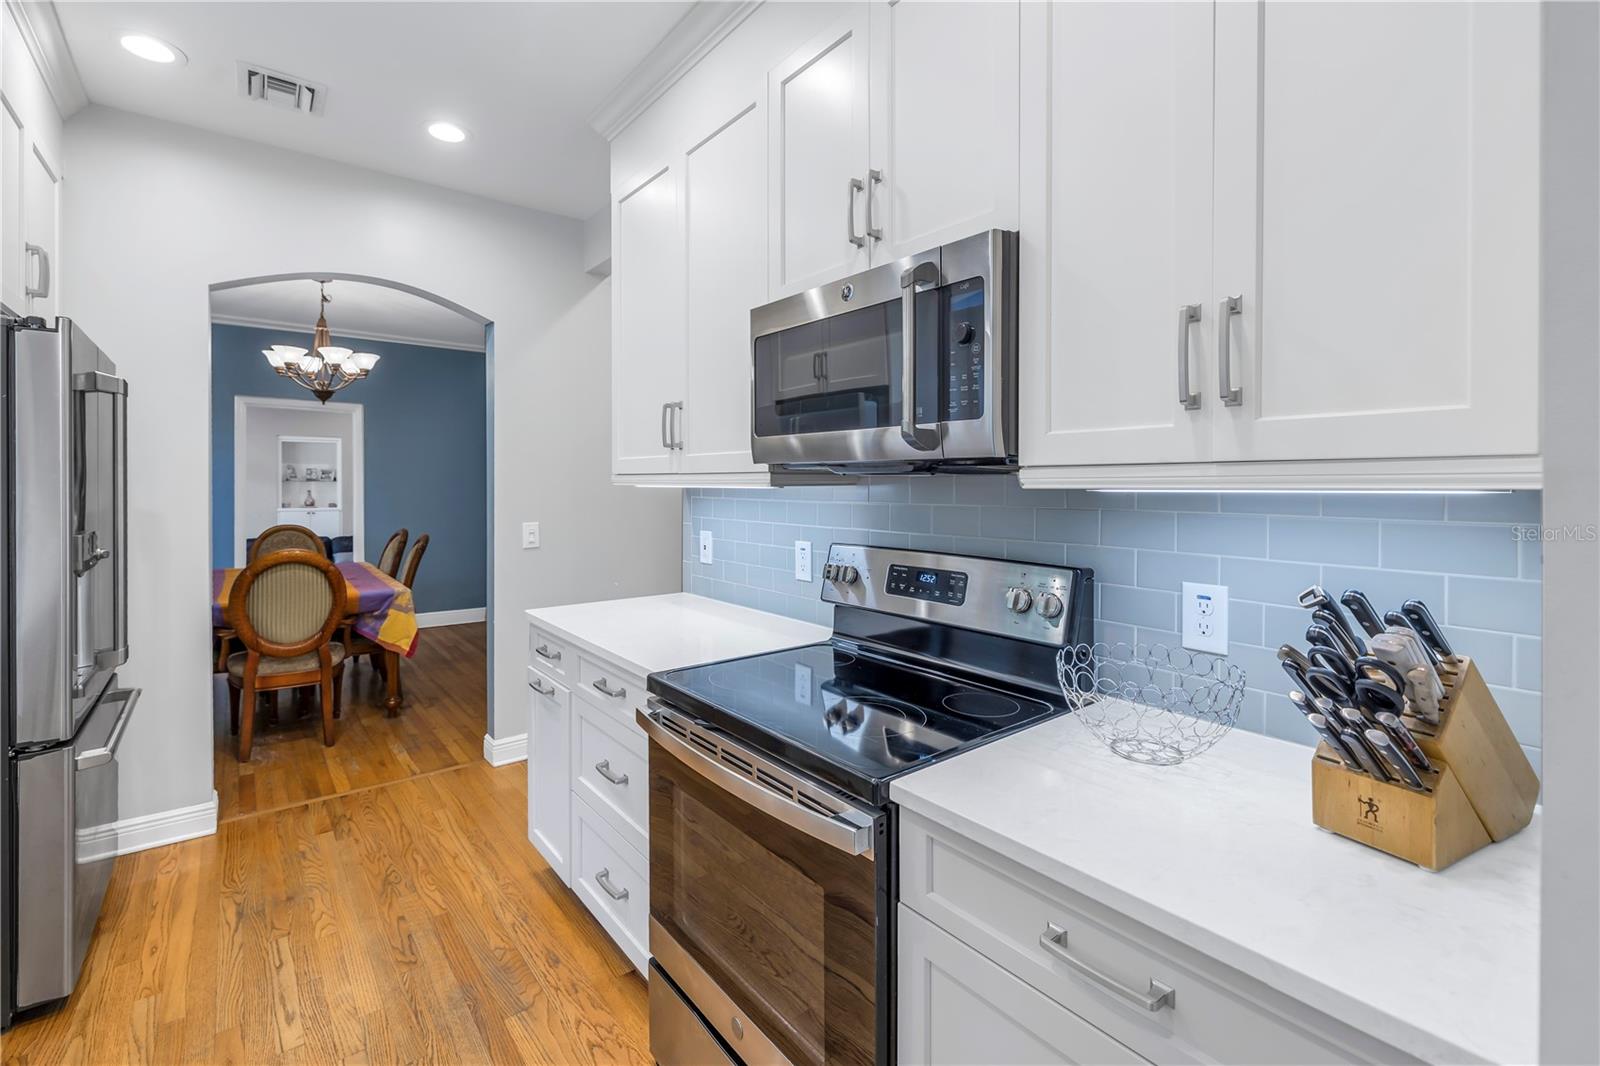 This exceptional kitchen boasts custom white cabinetry, quartz counters and a sizable pantry area.